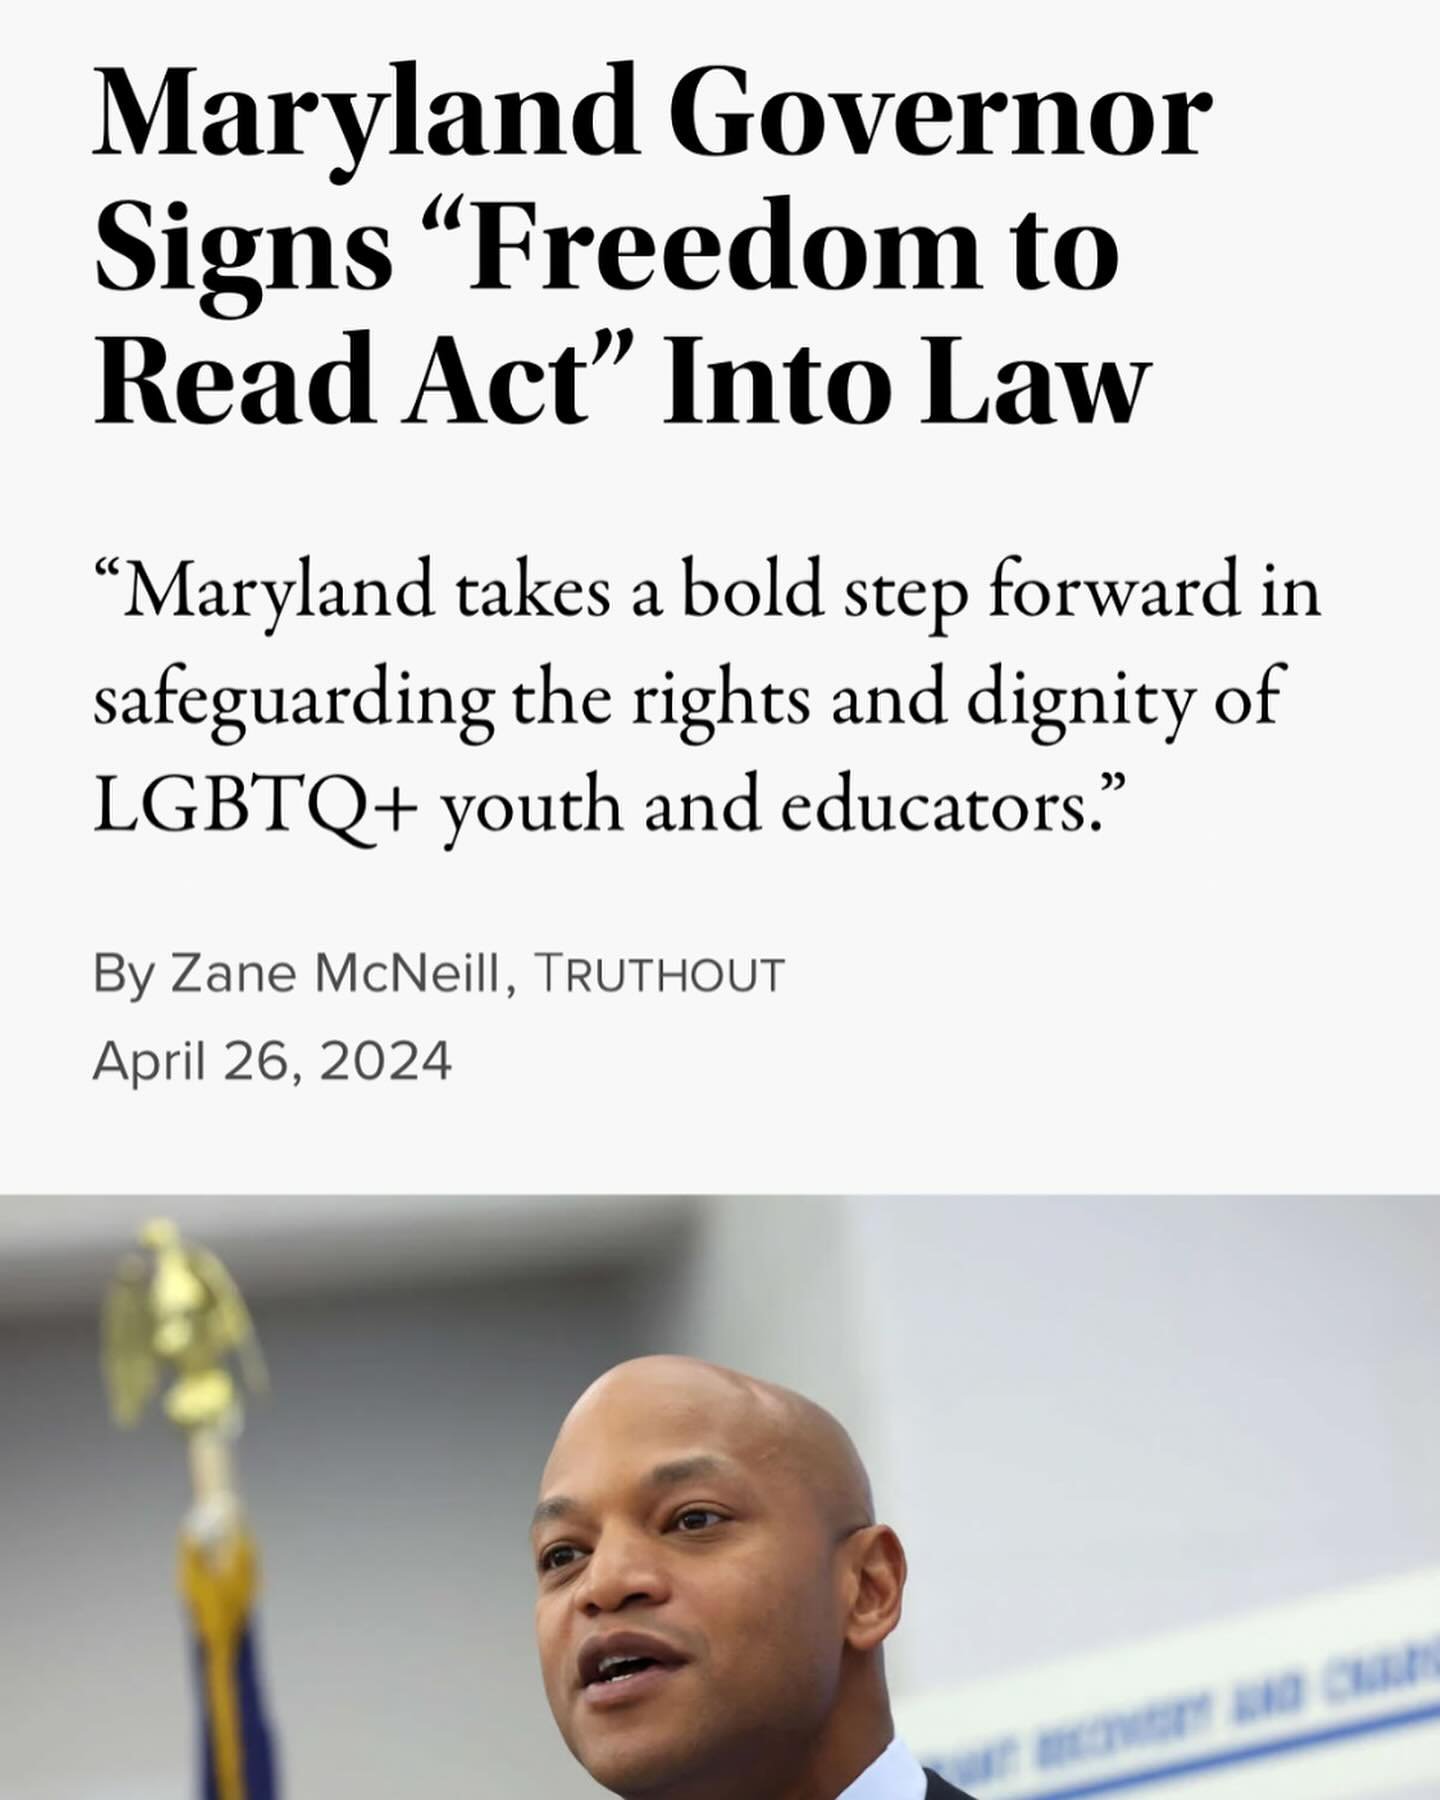 #gamechanger #freedomtoread 

Article source: @truthout 

This law protects access to BIPOC and LGBTQ+ titles in public schools and libraries. Protects librarians and teachers from retaliation. See below to understand national trends and what a diffe